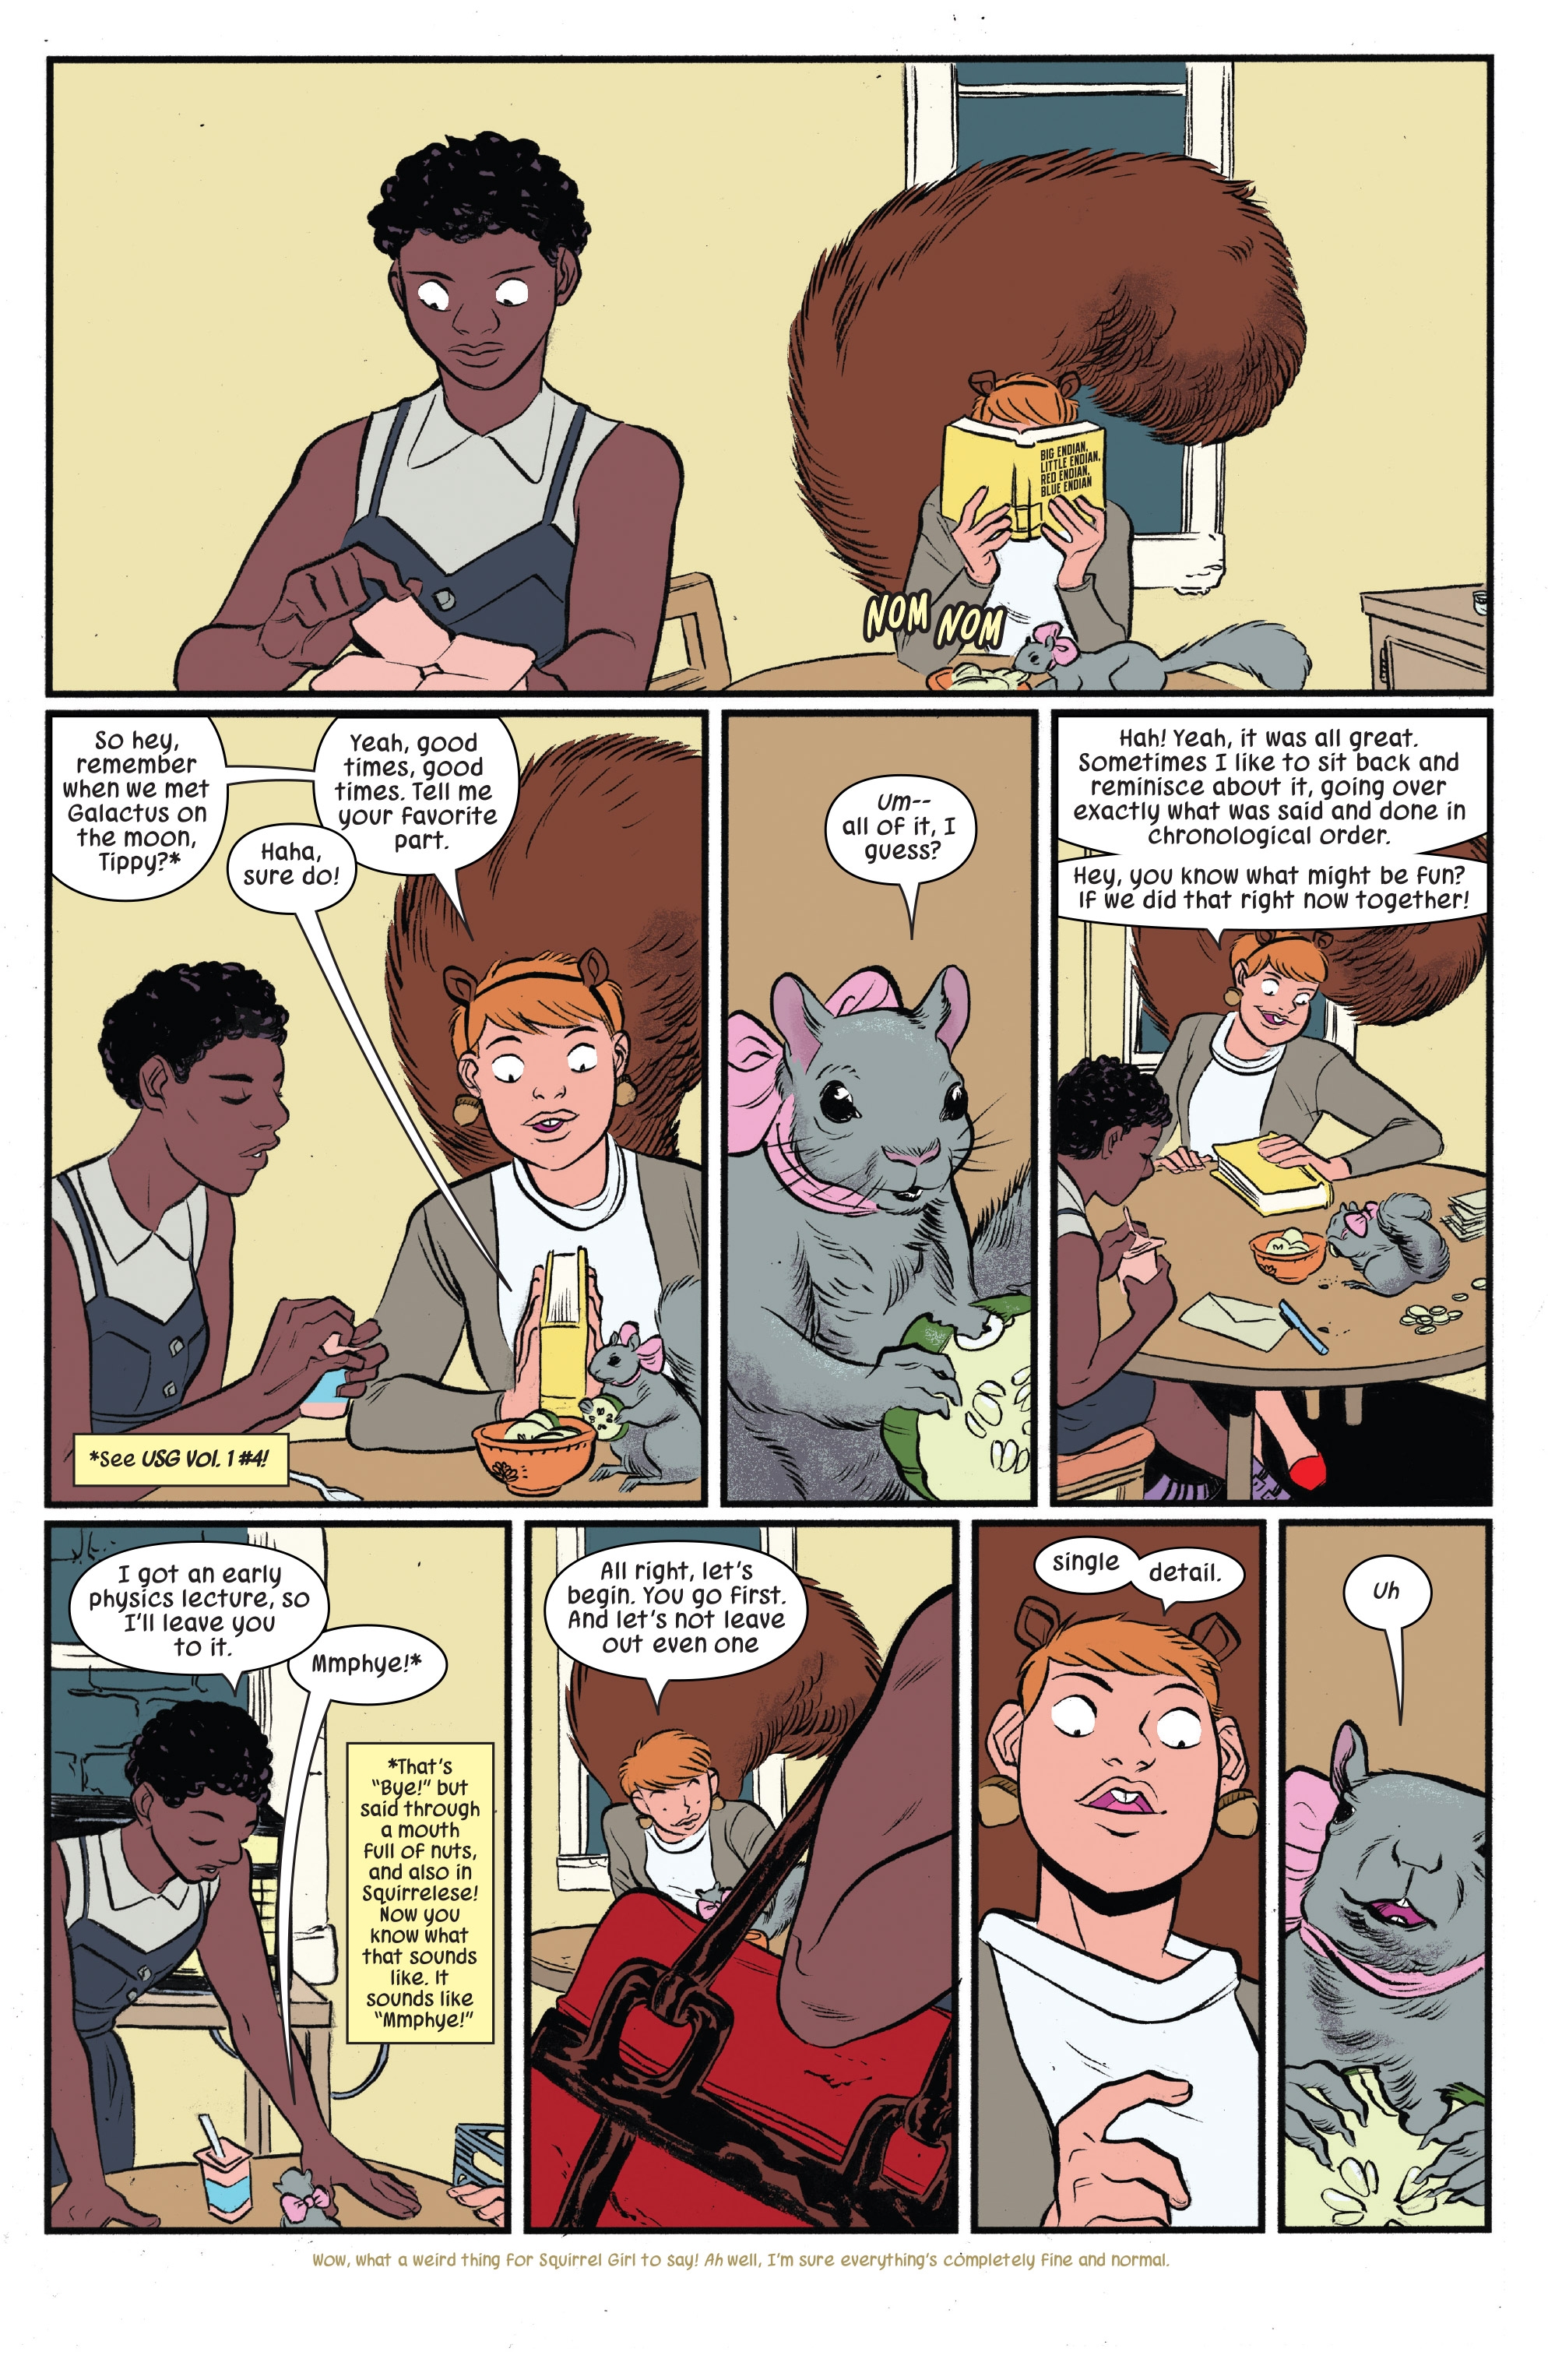 The Unbeatable Squirrel Girl Vol. 2 (2015): Chapter 27 - Page 3